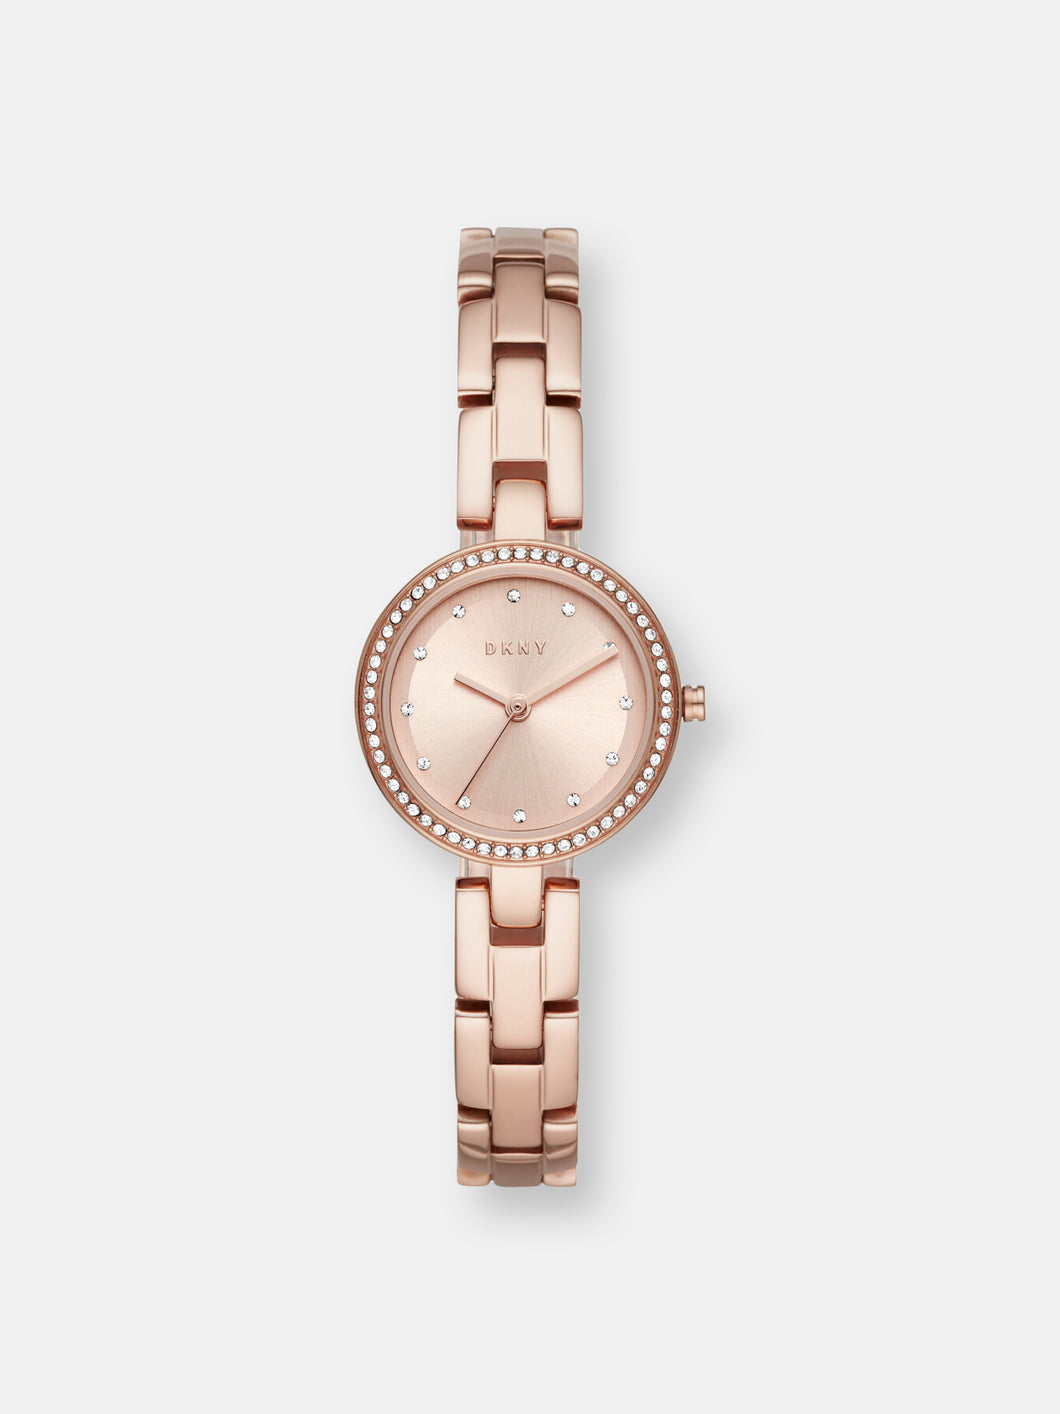 Dkny Women's City Link NY2826 Rose-Gold Stainless-Steel Quartz Fashion Watch